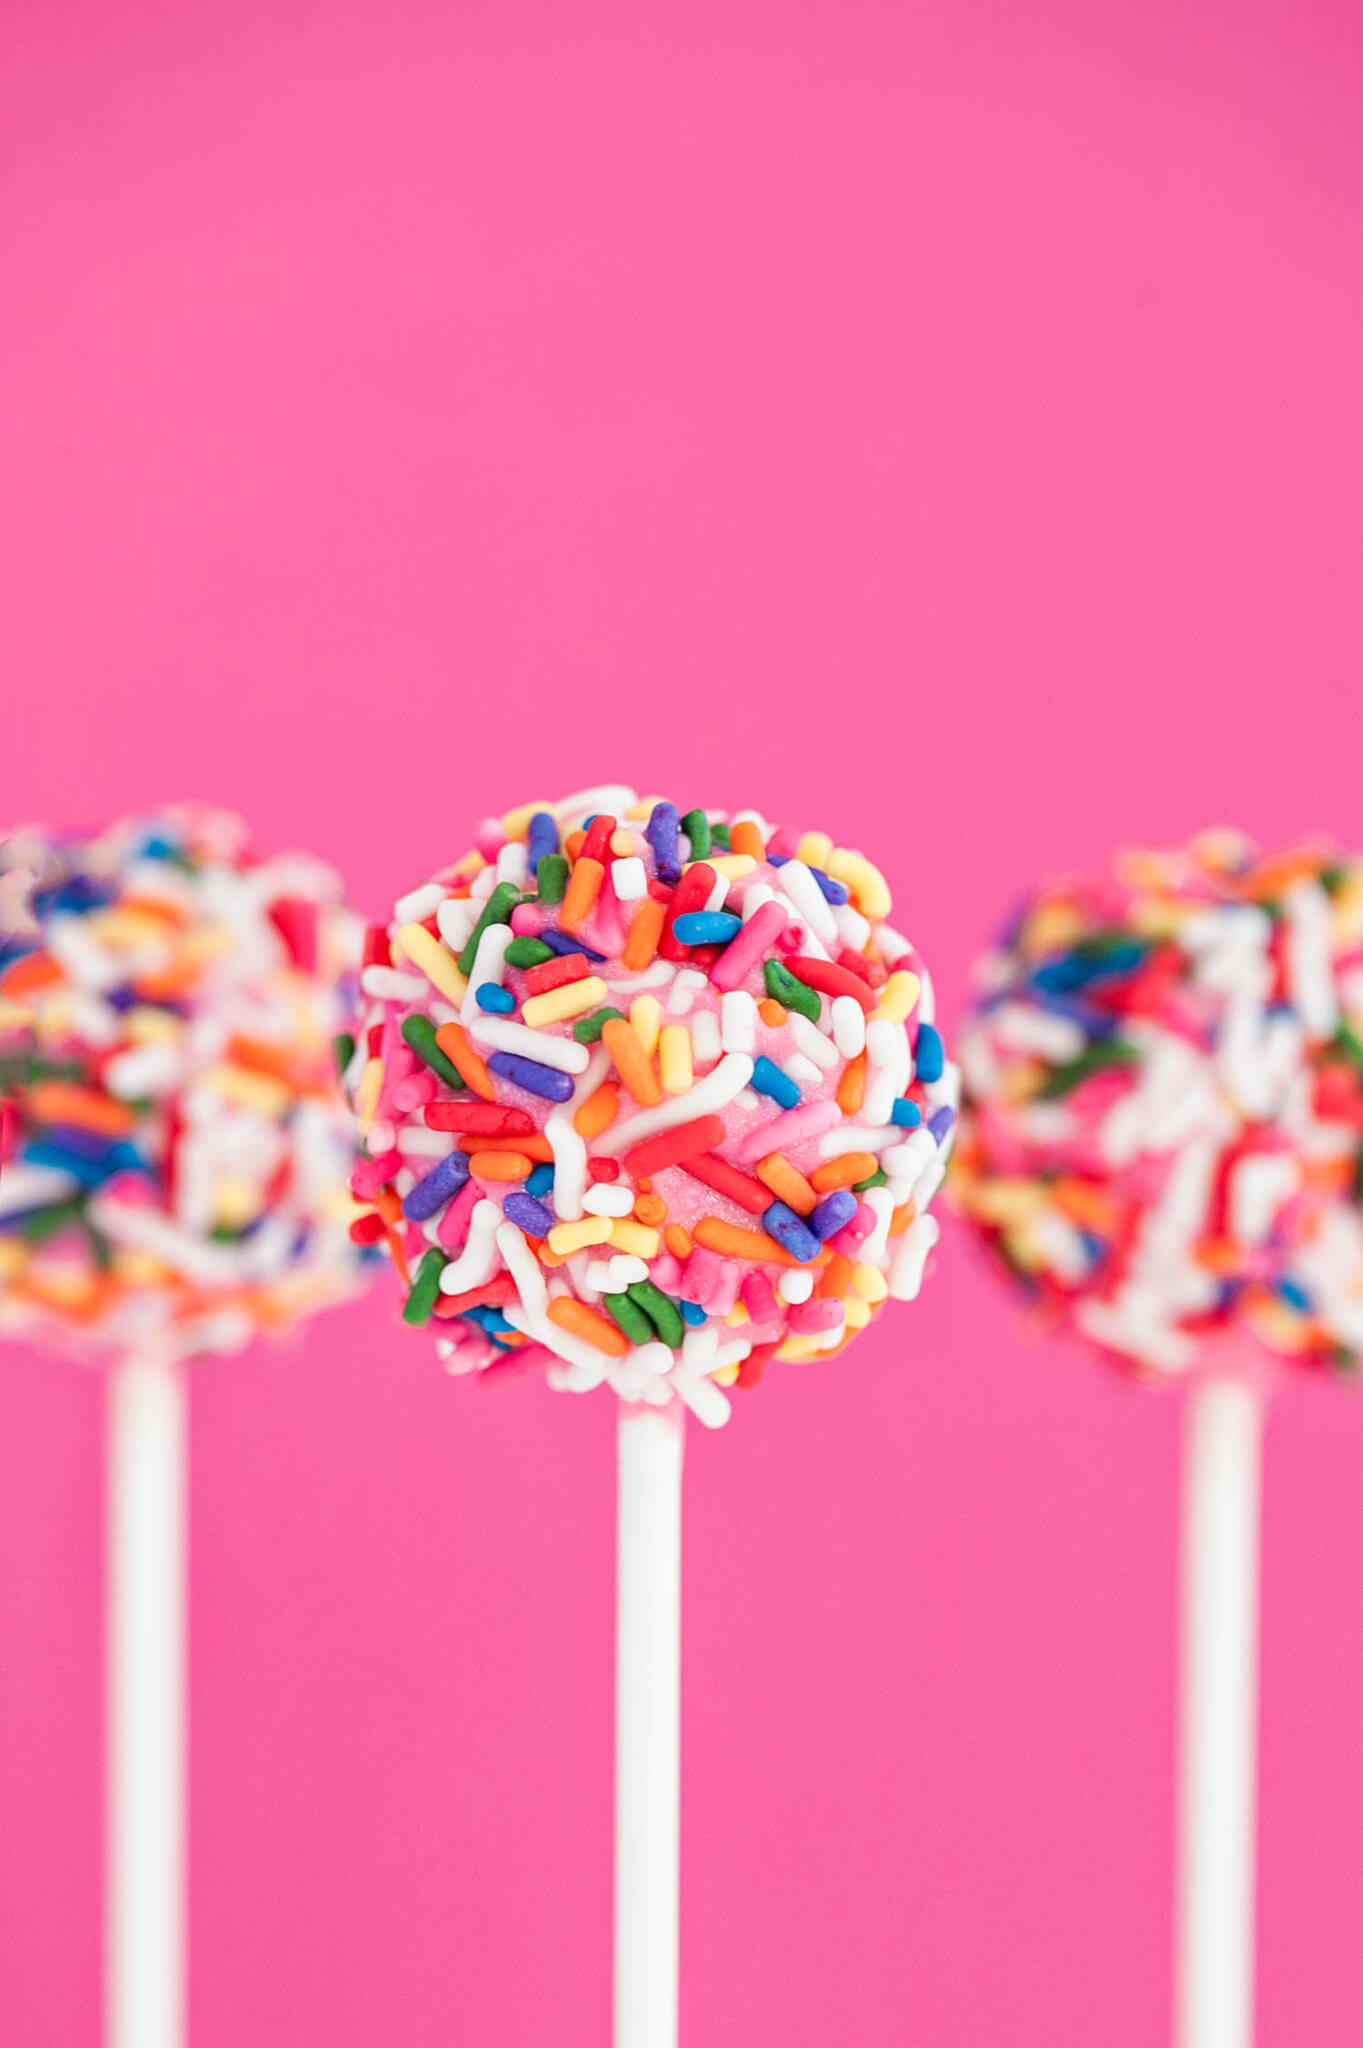 Homemade Strawberry Cake Pops With Sprinkles On Pink Backgroun